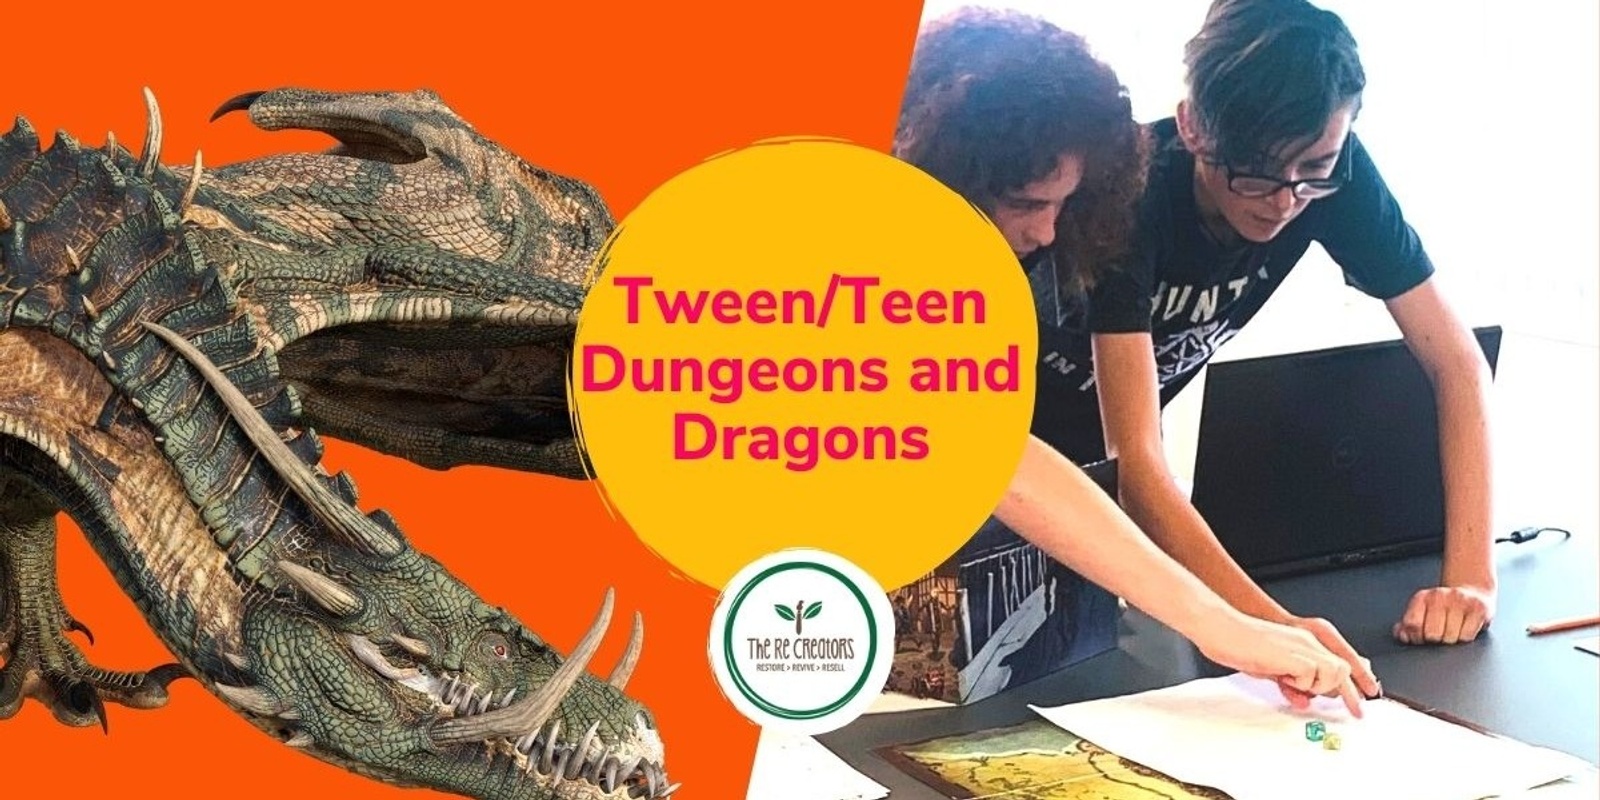 Dungeons and Dragons (DnD) 8 wk campaign for tweens and teens, YMCA Massey, Sat 22 July - 9 Sep, 2-5pm